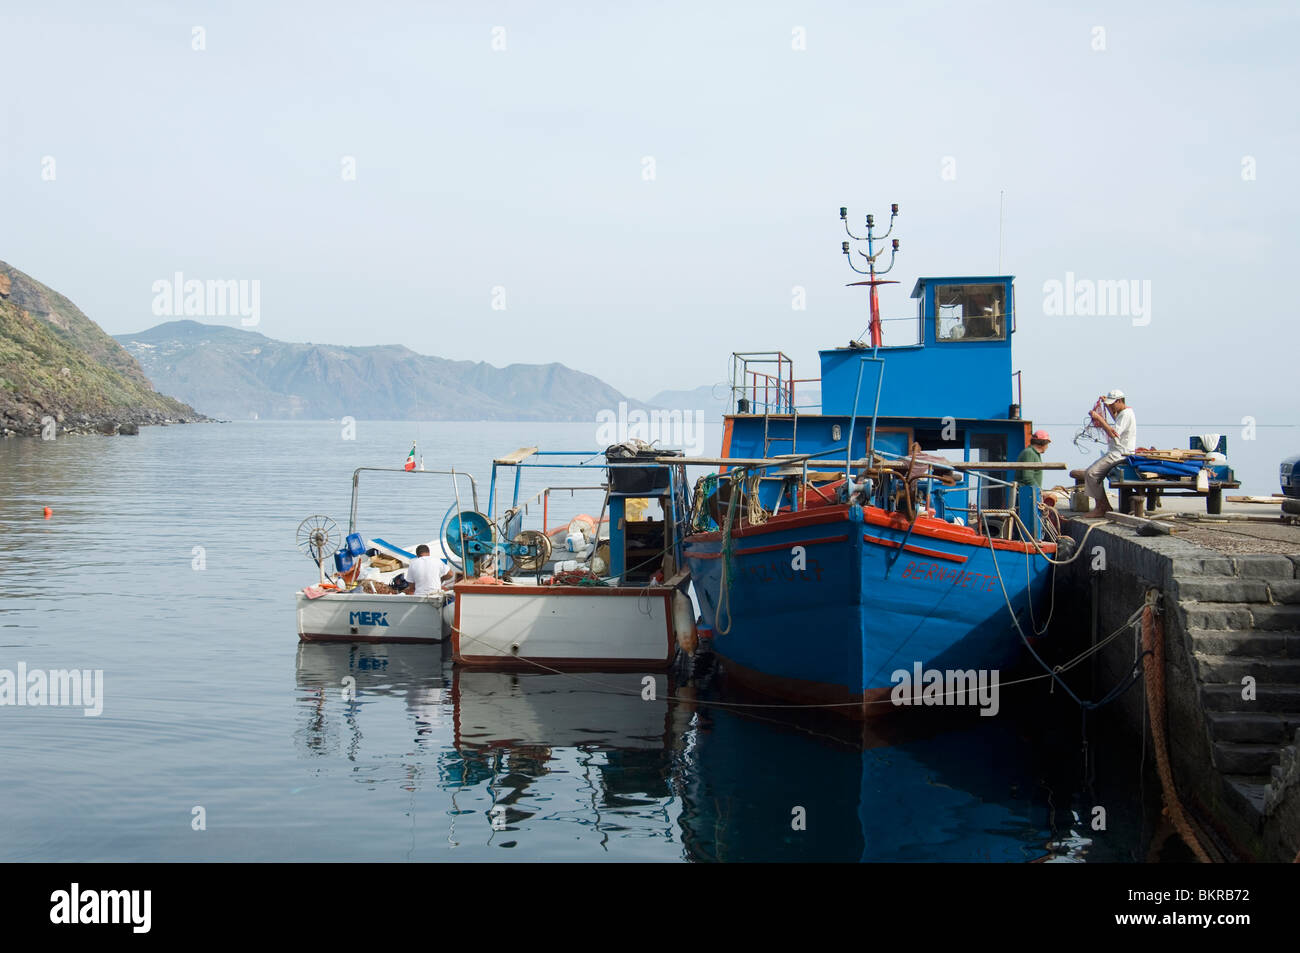 Fishermen and boats at the port of Rinella on the island of  Salina - Aeolian Islands Stock Photo